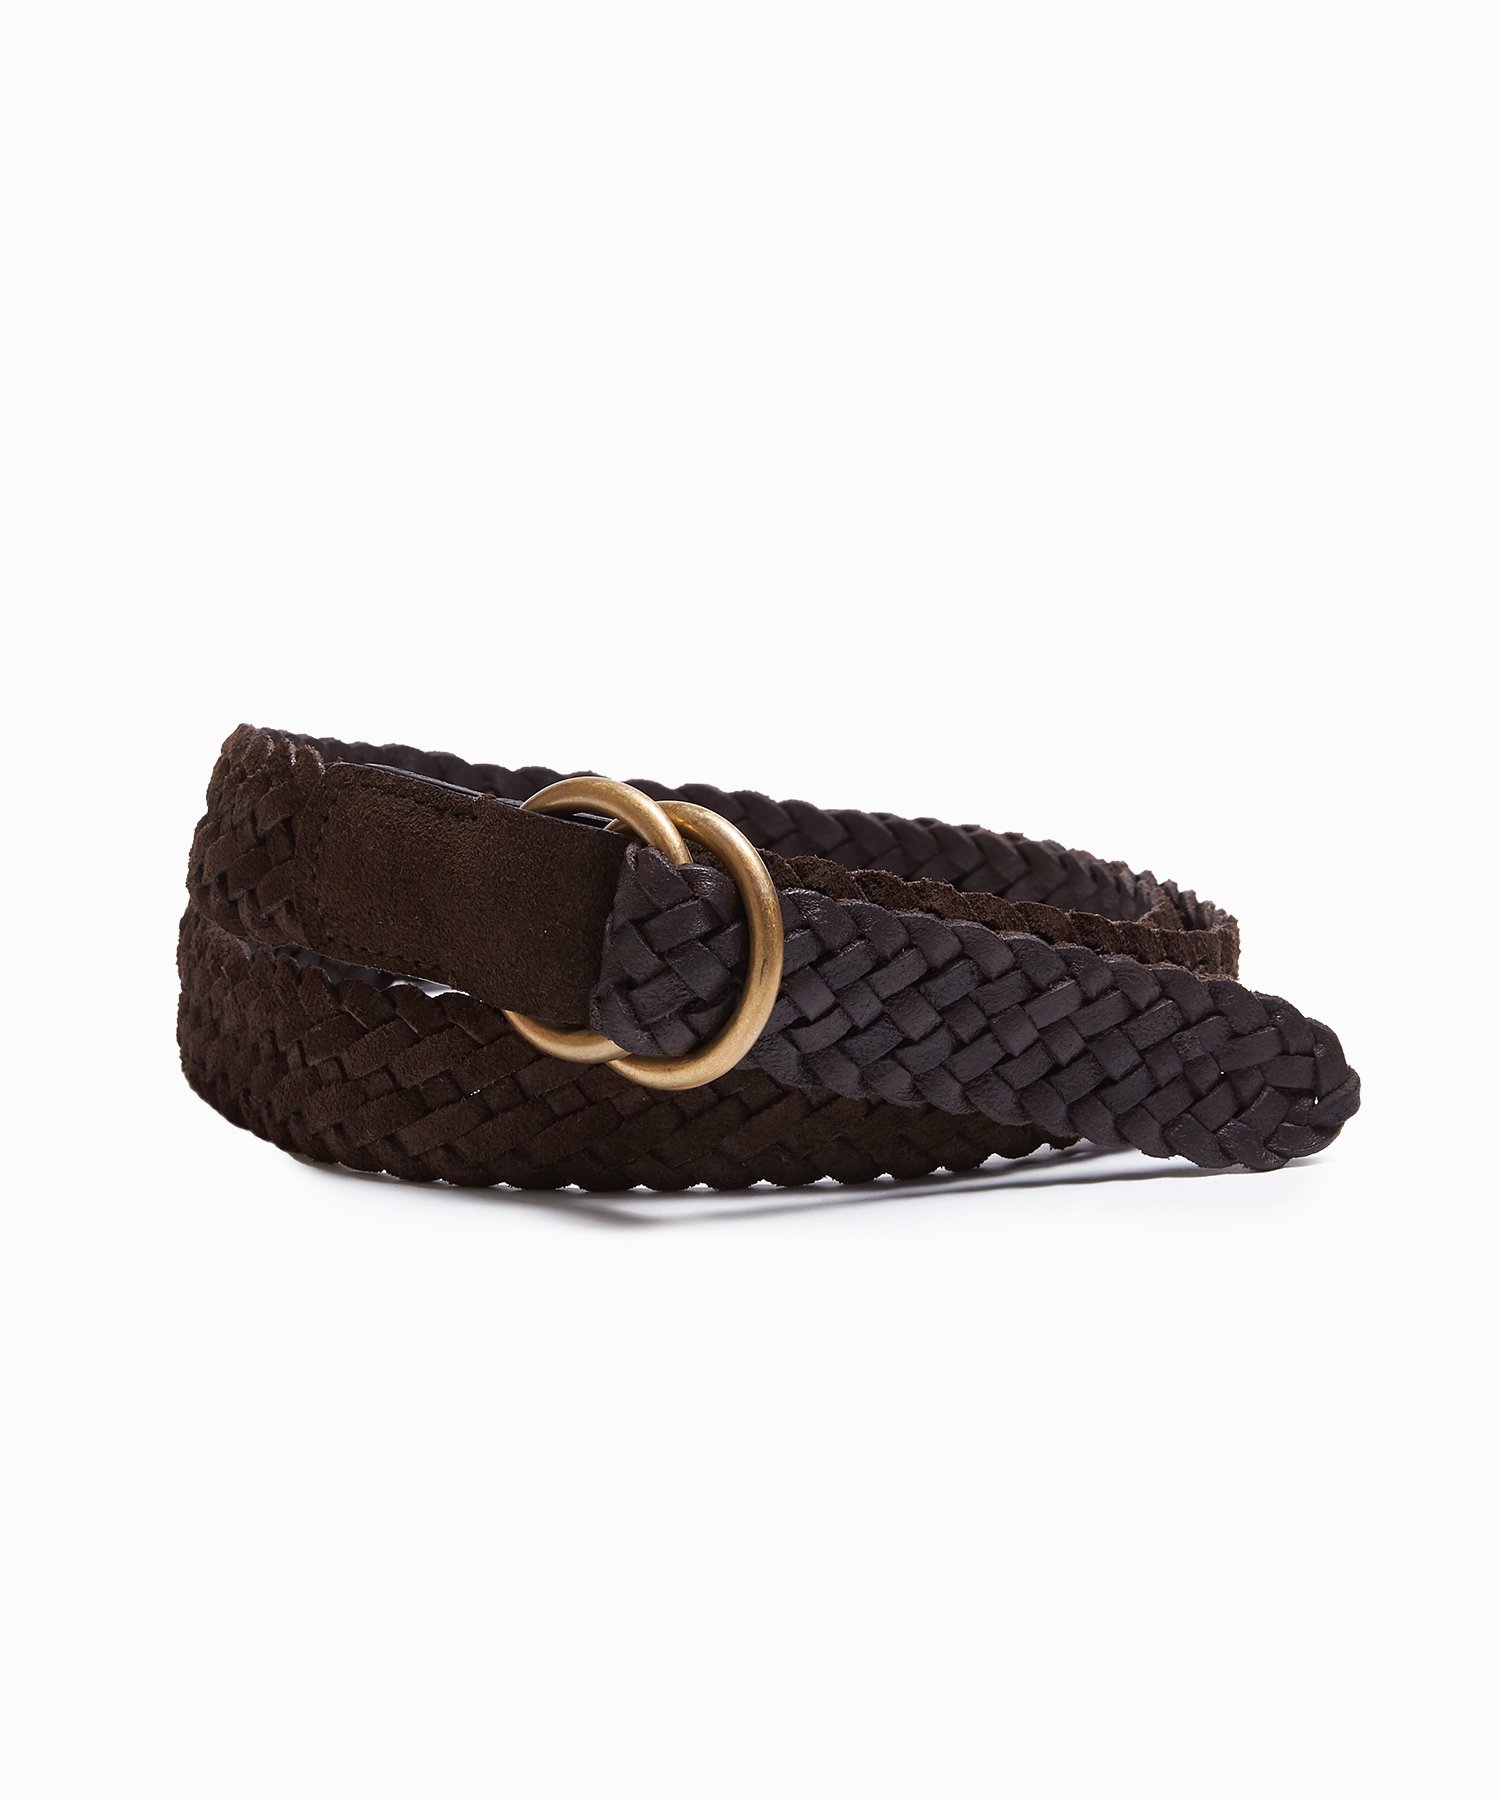 Anderson’s Suede Braided D-Ring Belt in Dark Brown | The Fashionisto